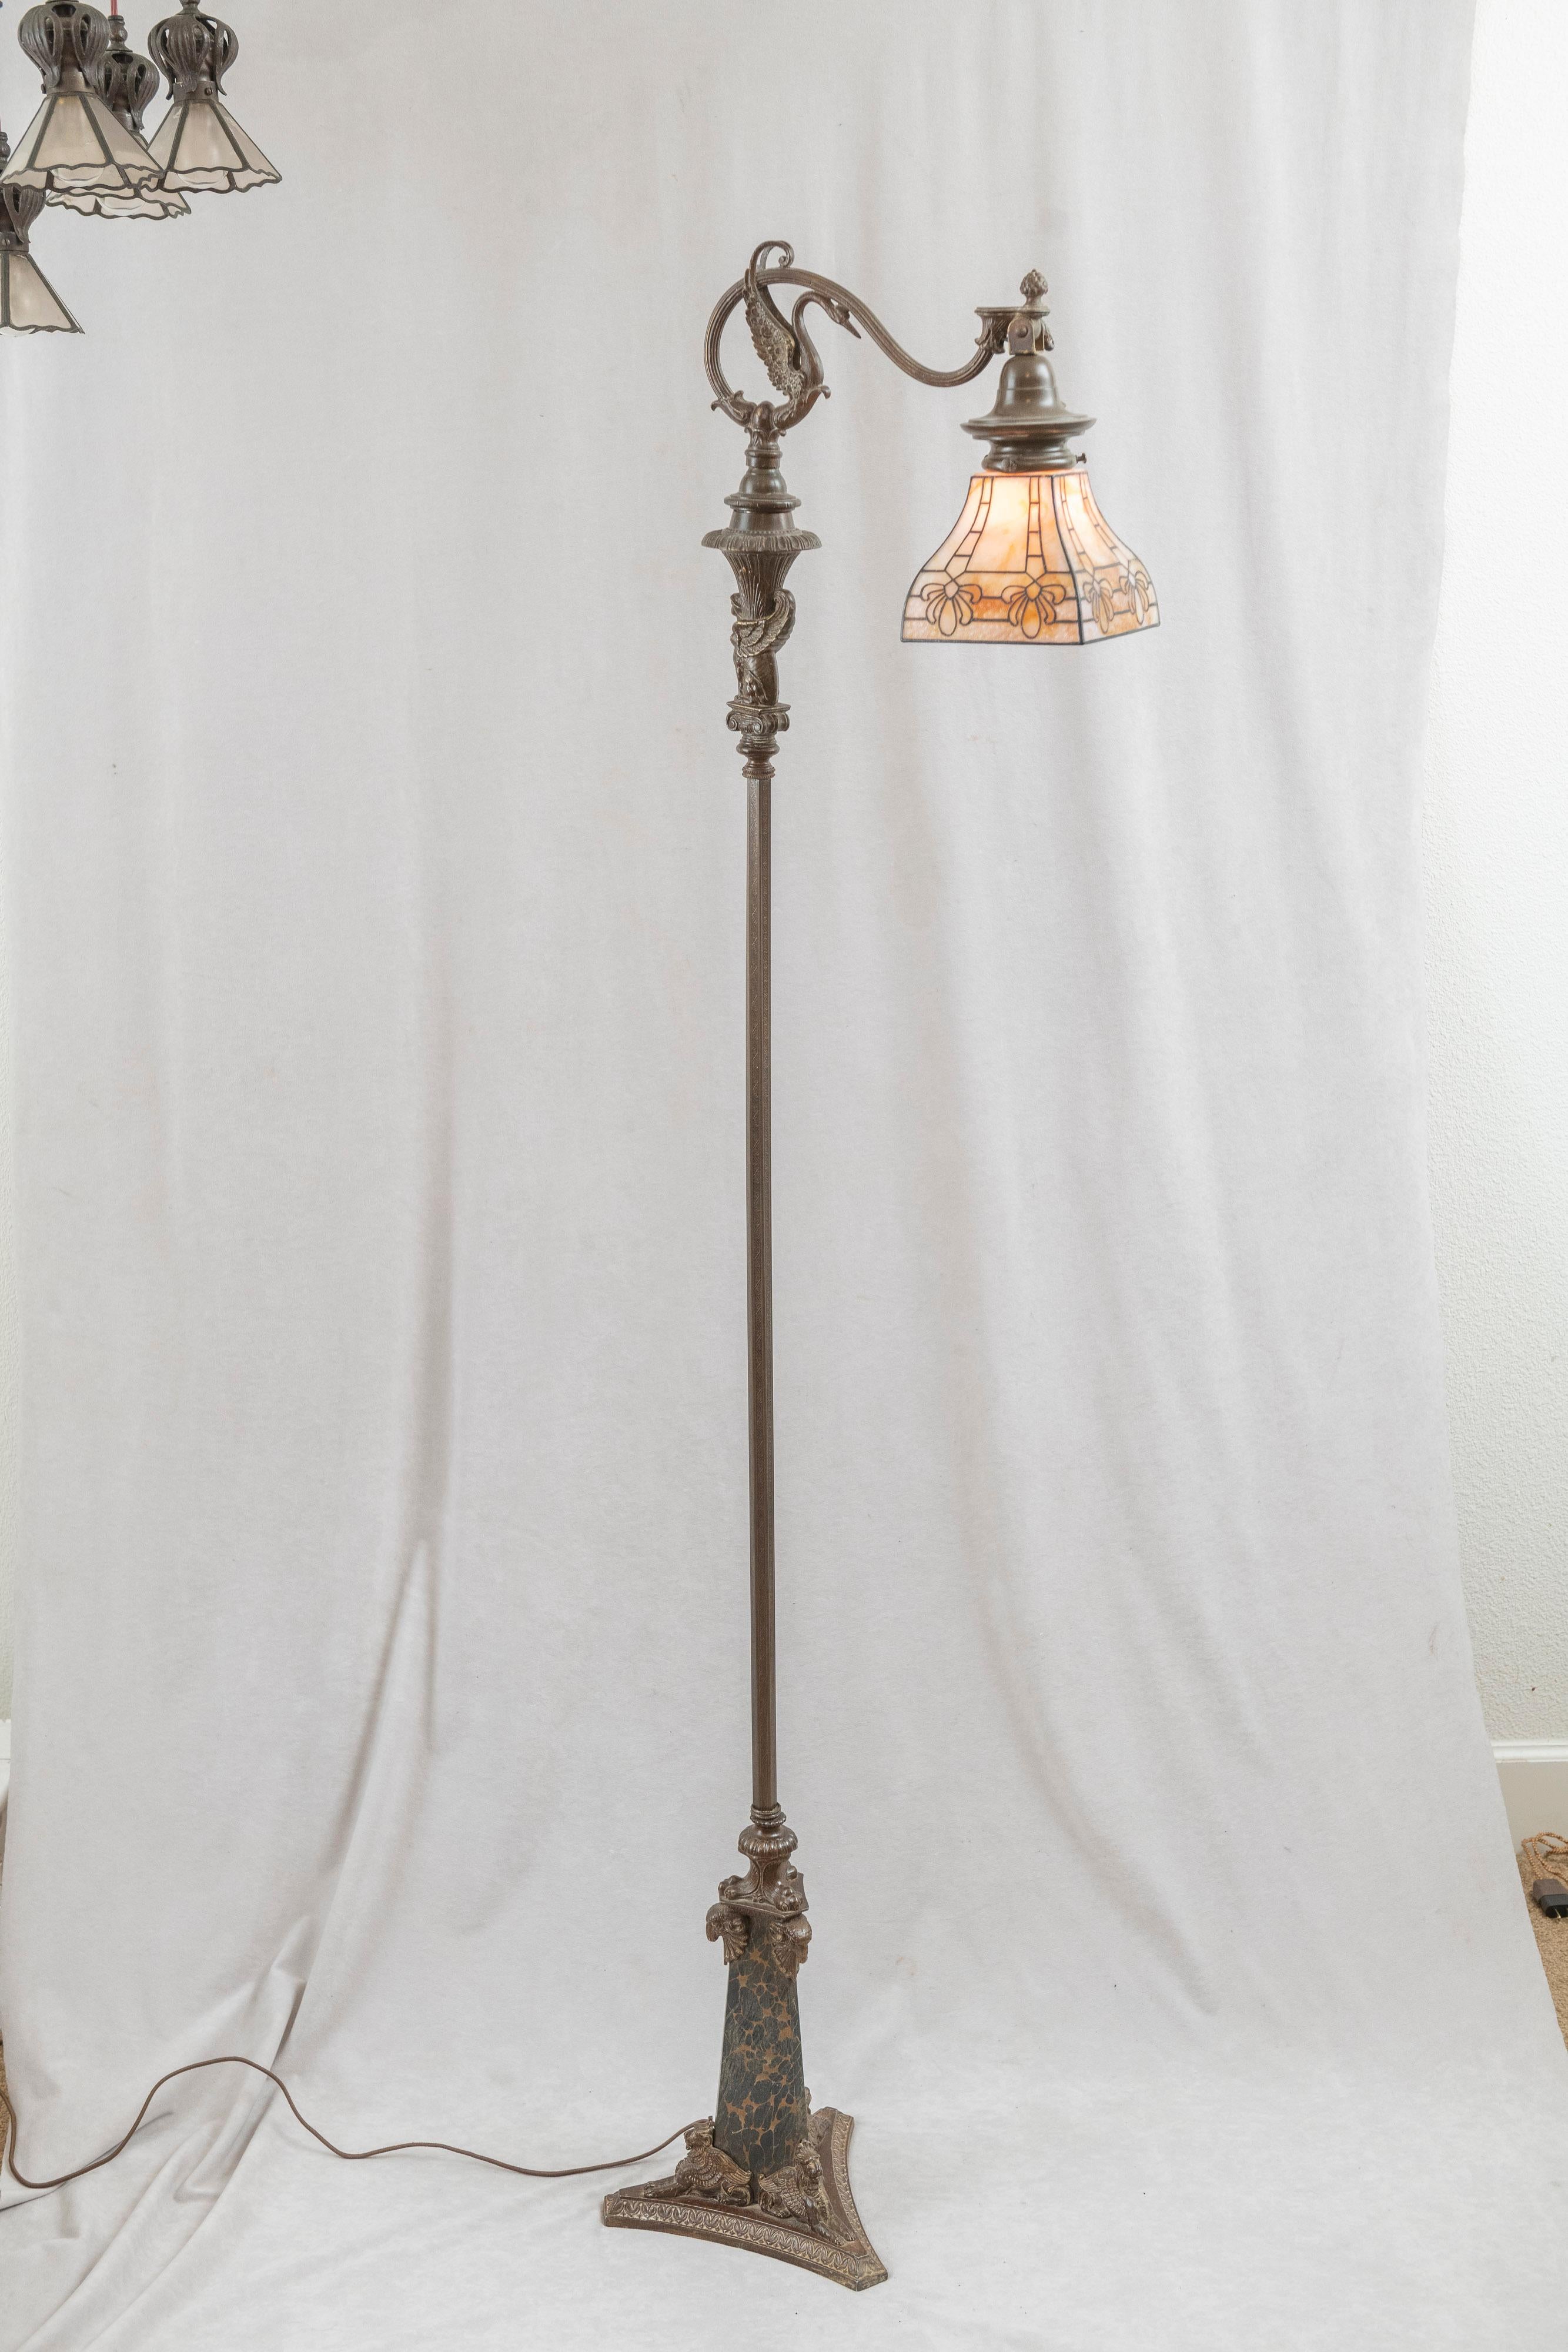  This incredible floor lamp has so many areas of interest that make it so special. The base, which we believe was done by Bradley & Hubbard, detailed castings of several characters. At the bottom there are 3 winged lions moving up to the top of that